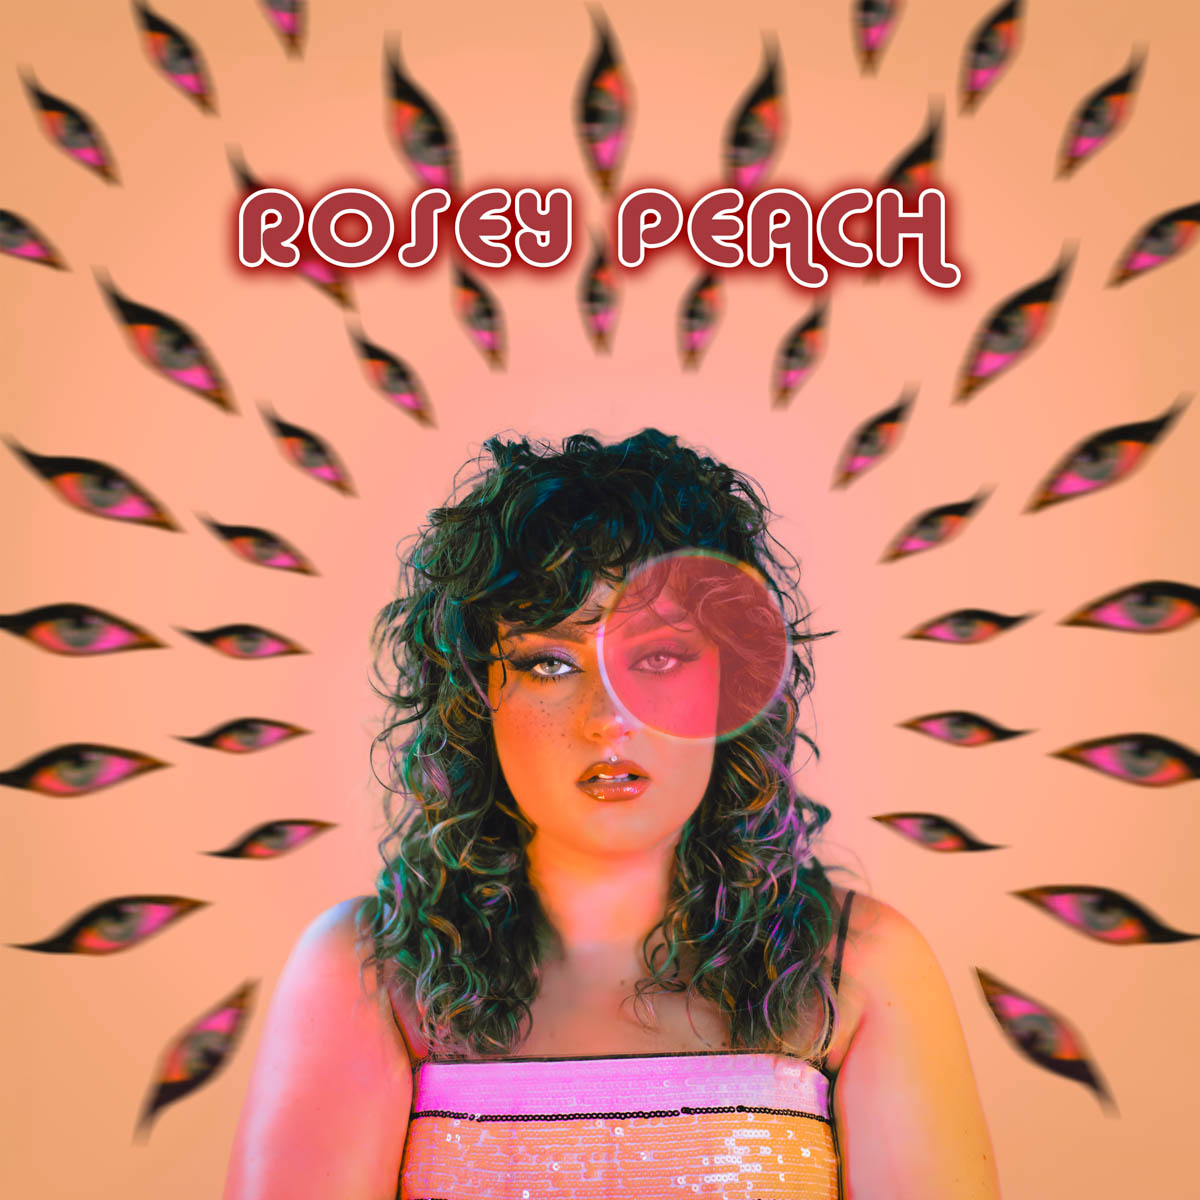 Album cover art with a woman that says "Rosey Peach"